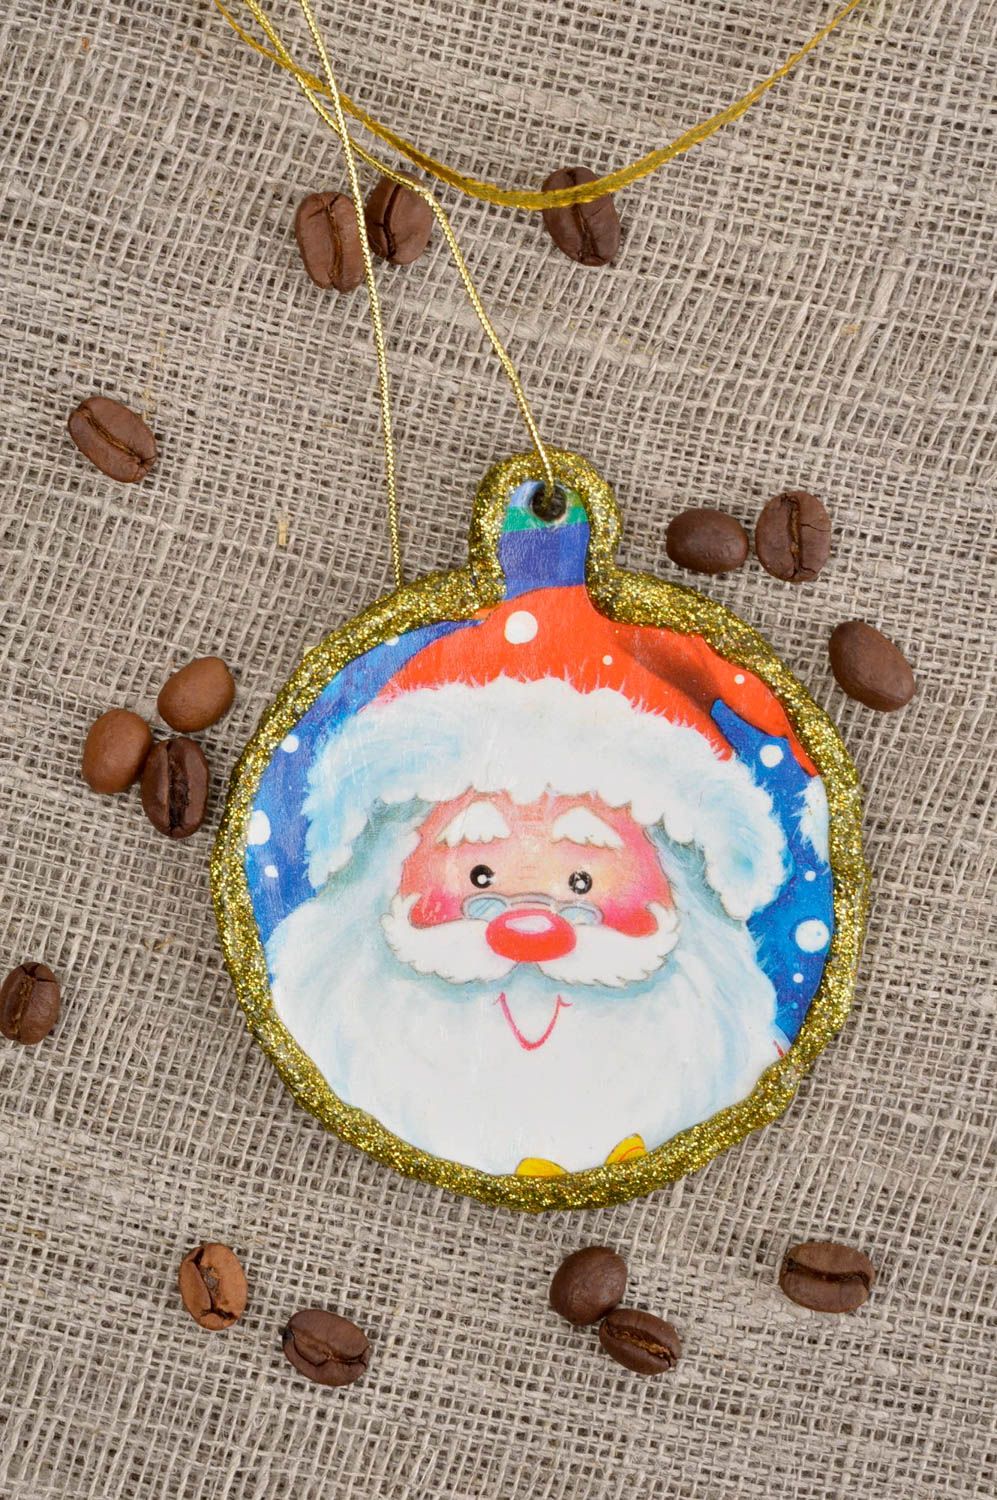 Handmade Christmas ornament home design cool rooms decorative use only photo 1